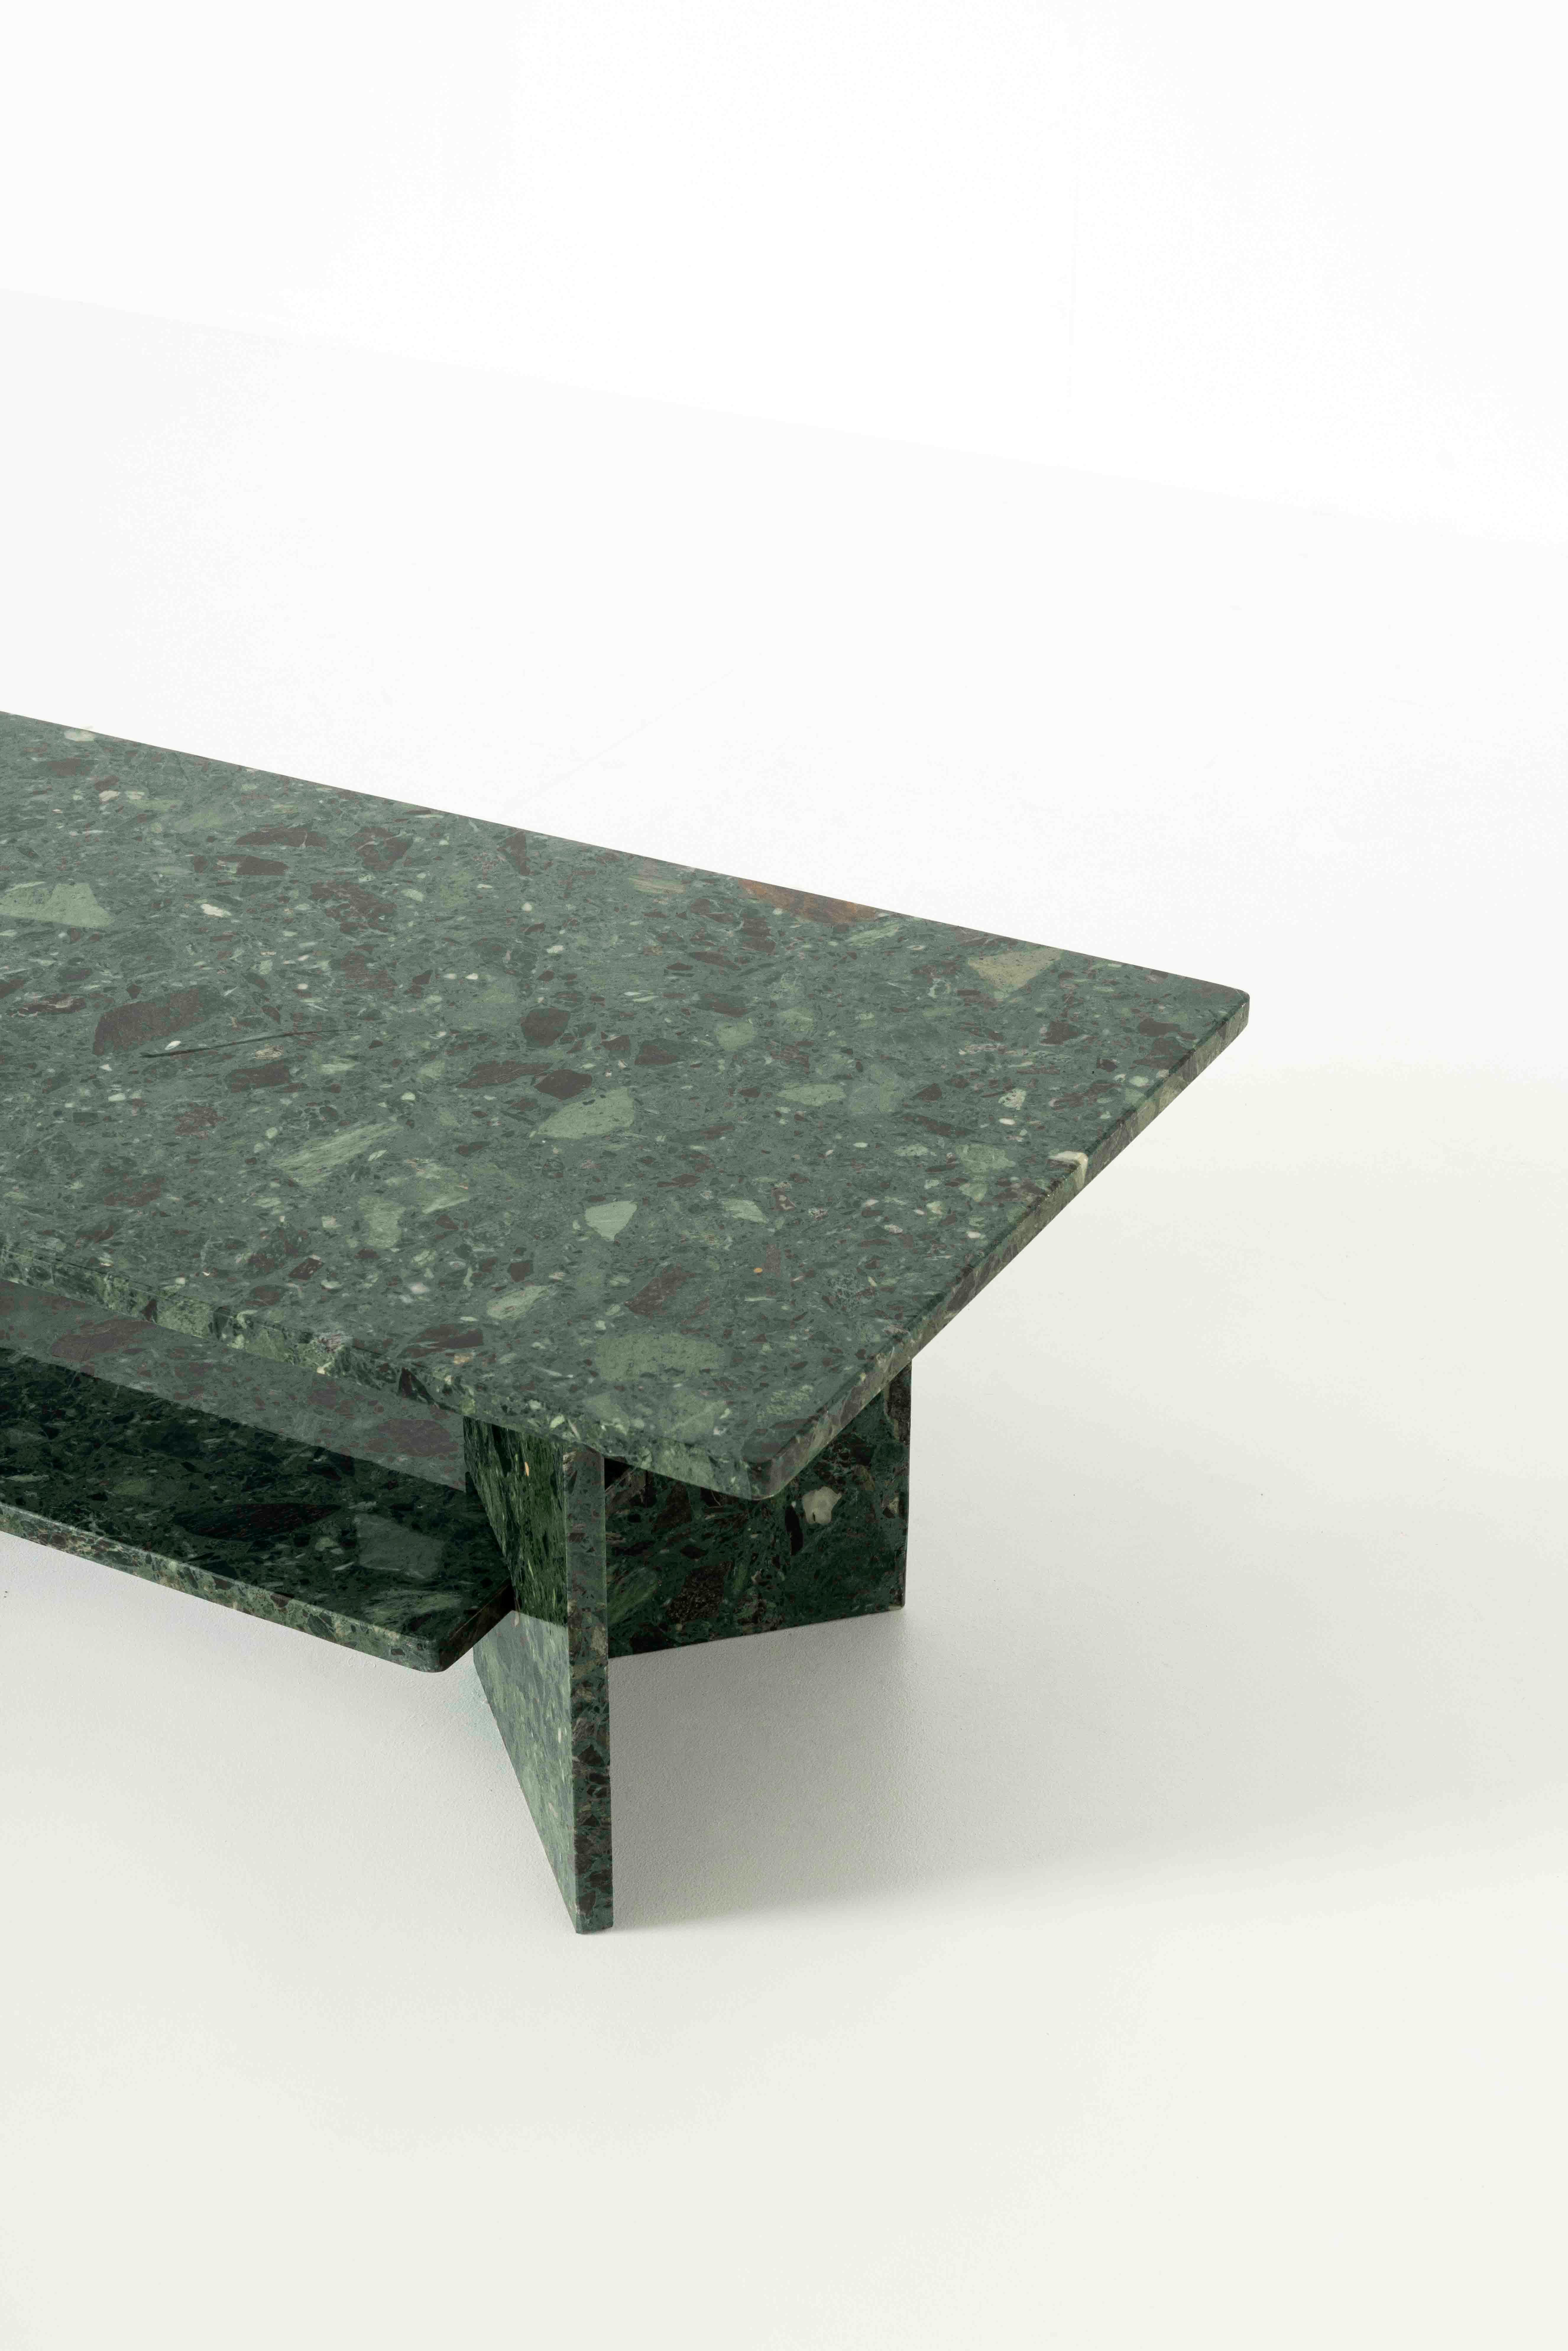 Italian Vintage Green Marble Coffee Table, 1980s For Sale 4